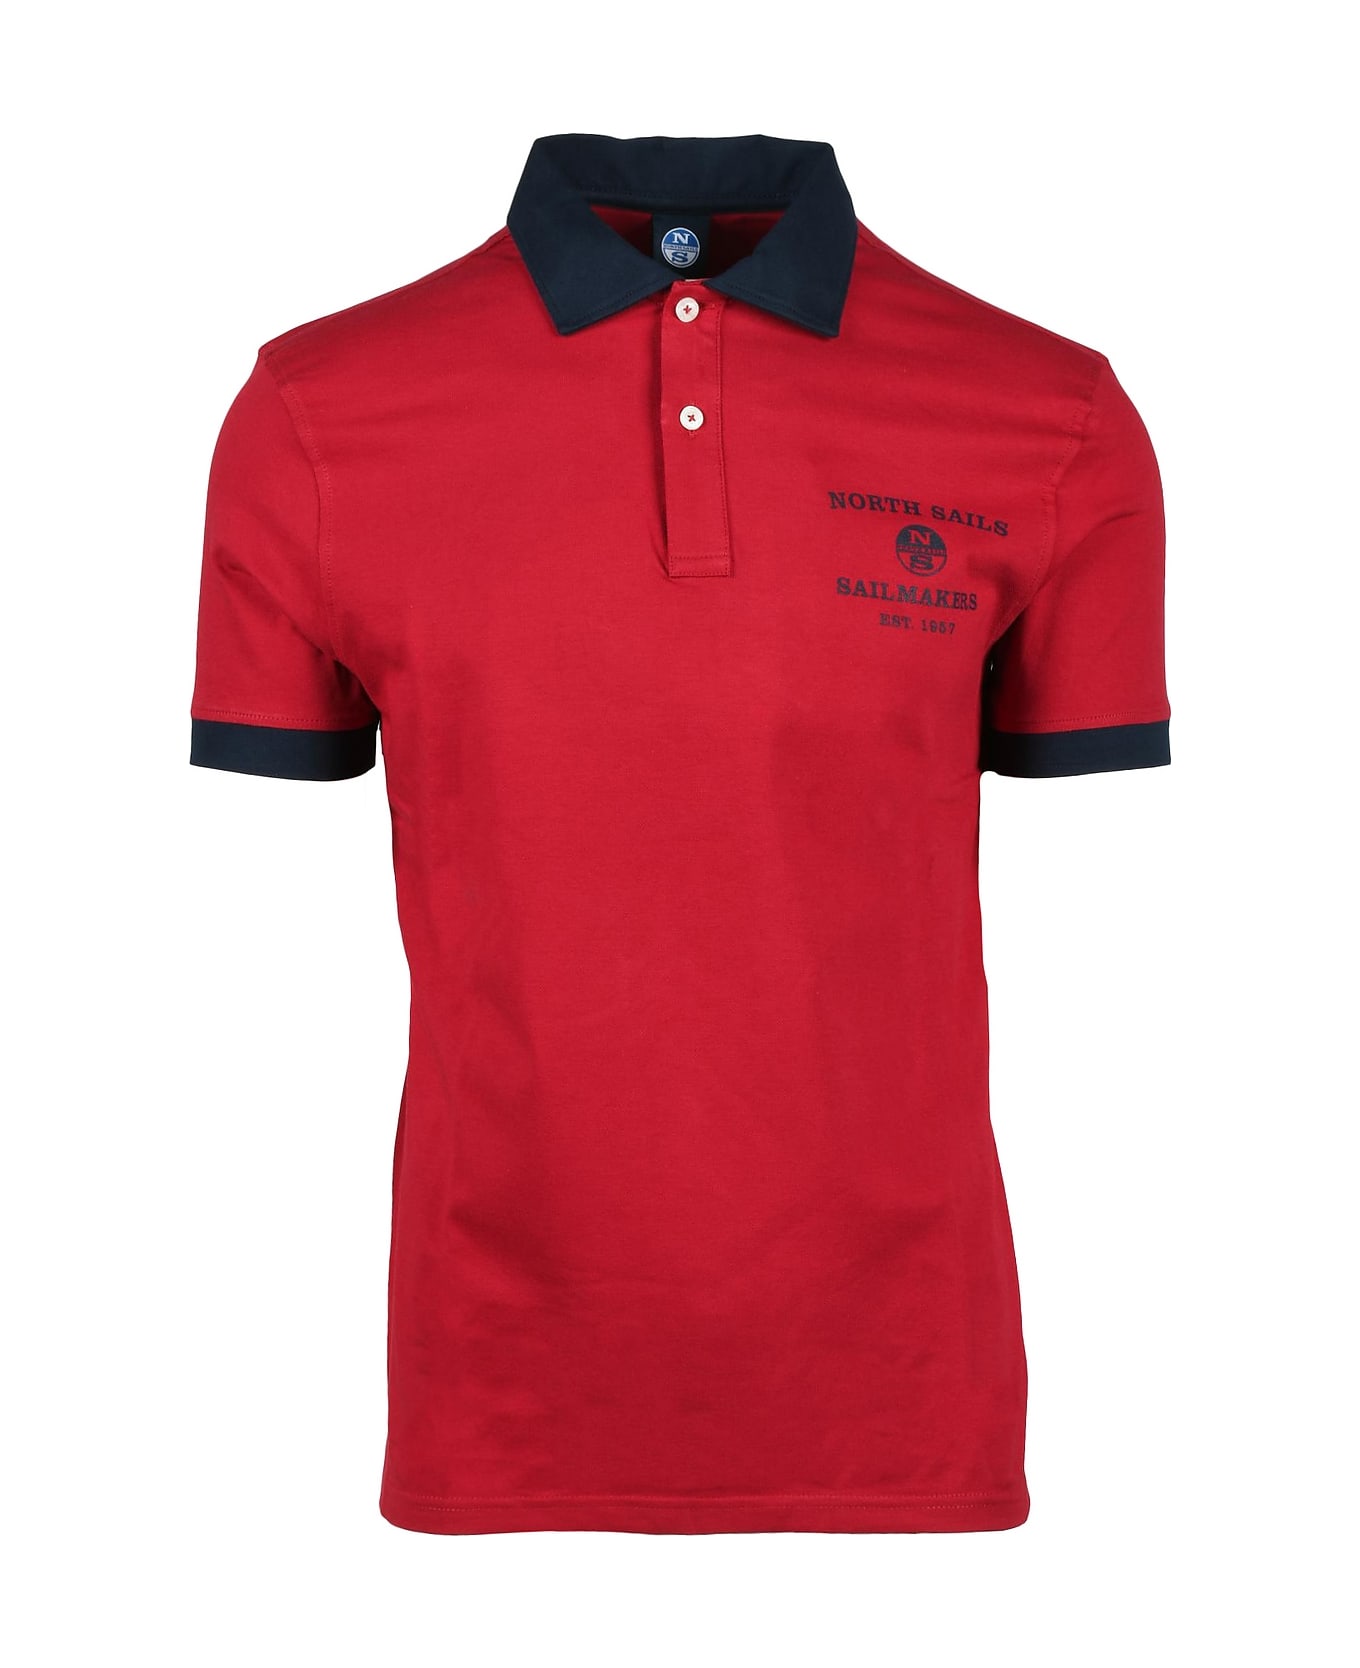 North Sails Men's Red Shirt - Red